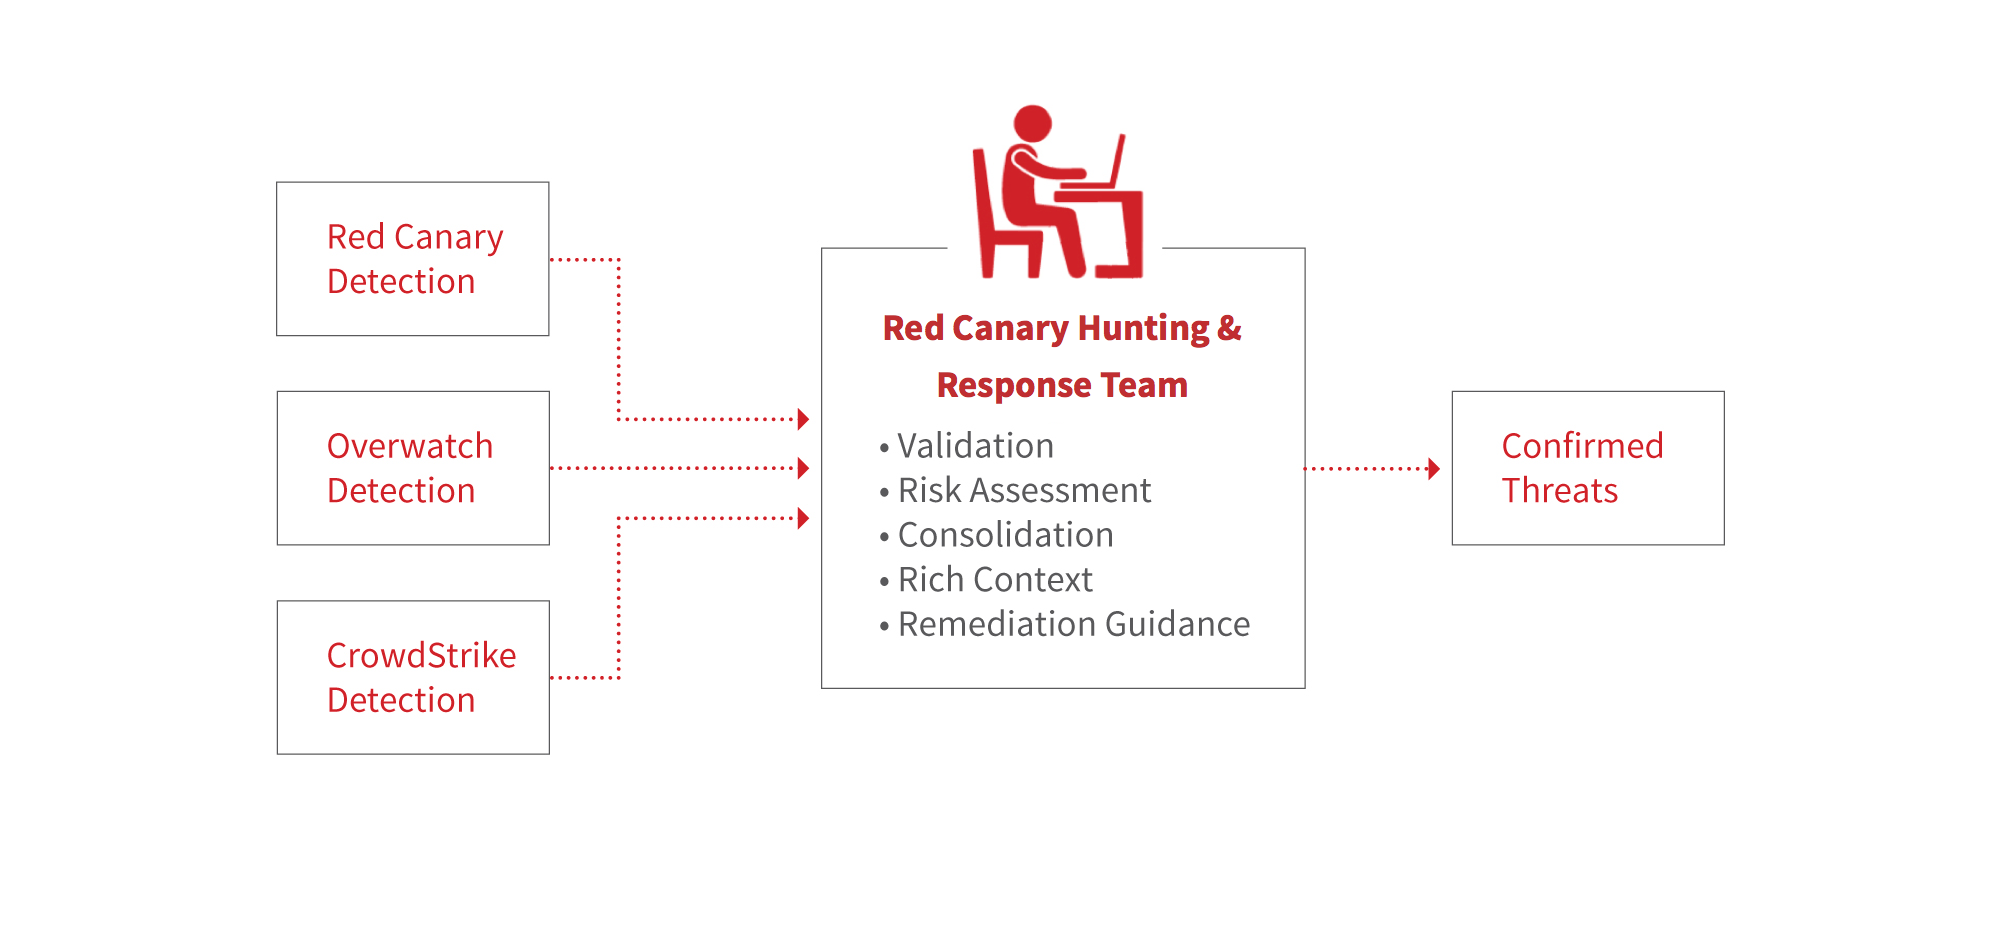 Red Canary and CrowdStrike